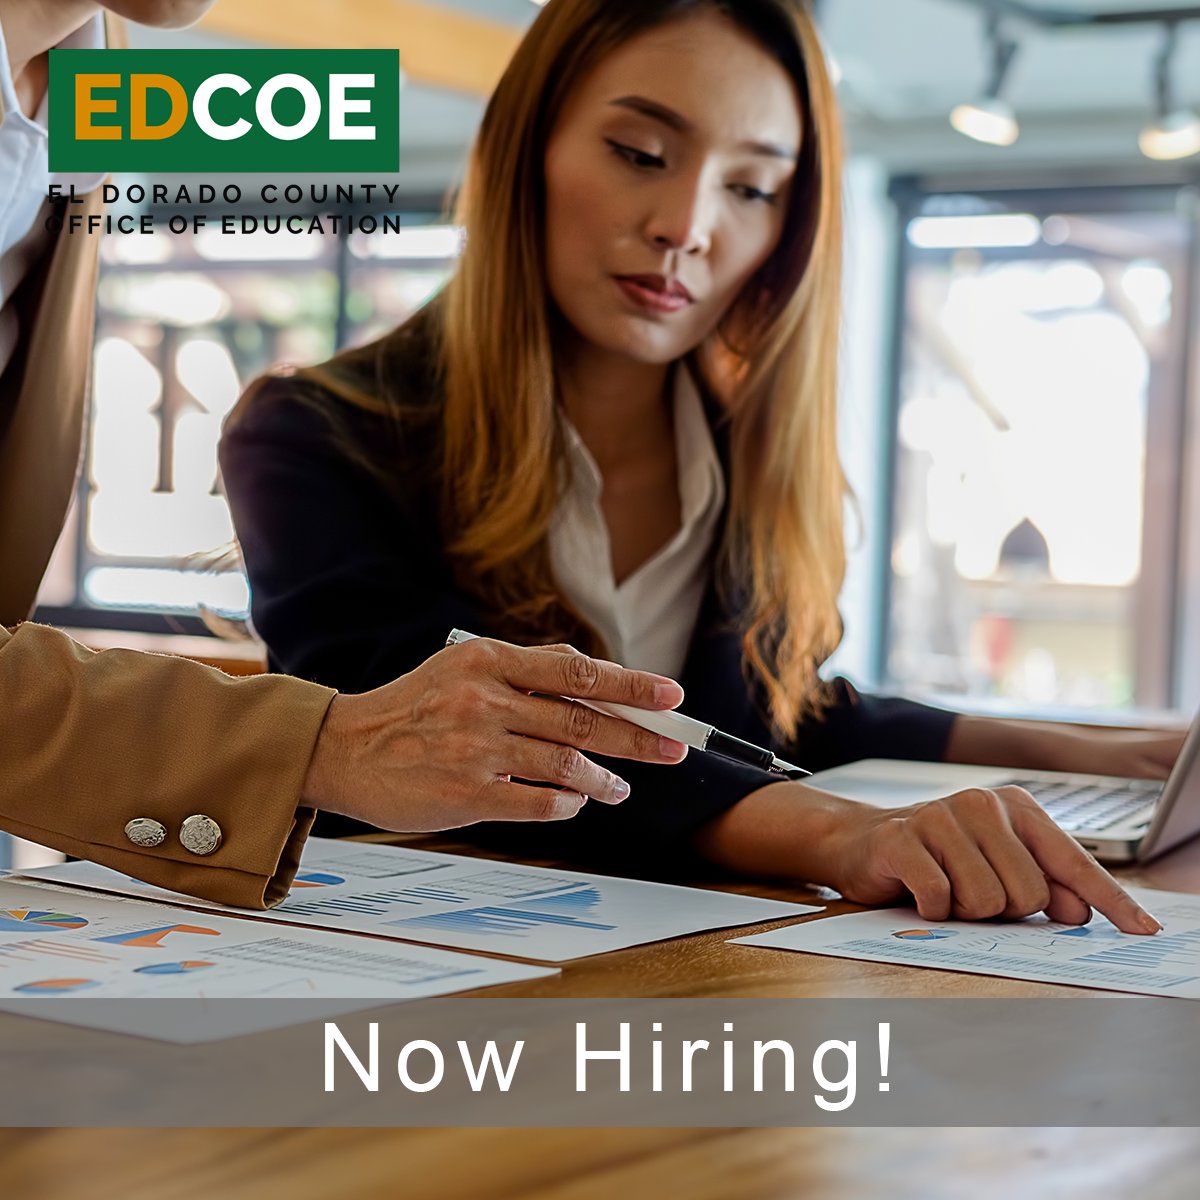 EDCOE is hiring a Program Assistant! Starting at $4,510.08 monthly. Apply now at edjoin.org/Home/JobPostin… EOE/SP4110